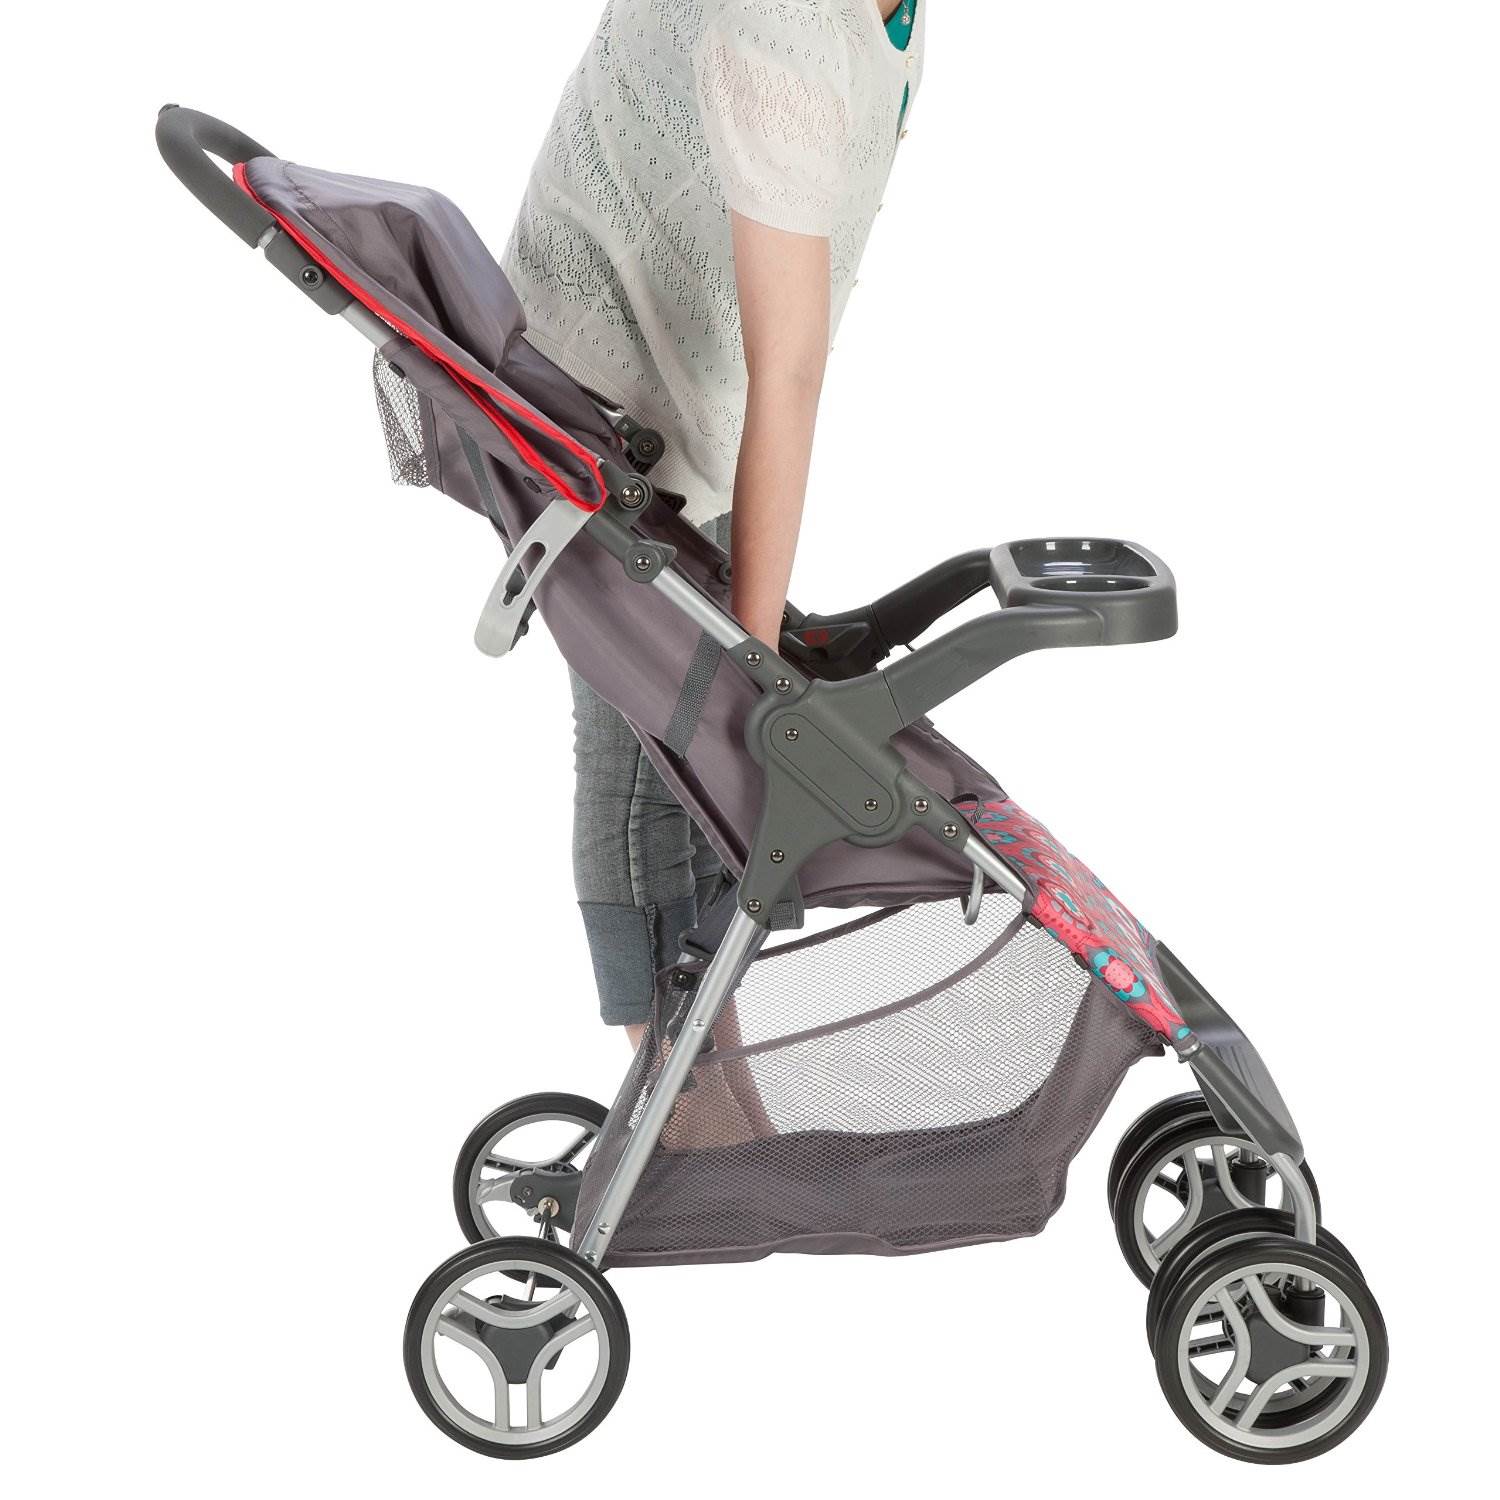 Cosco Lift &amp; Stroll Posey Pop Convenience Standard Stroller - image 4 of 8